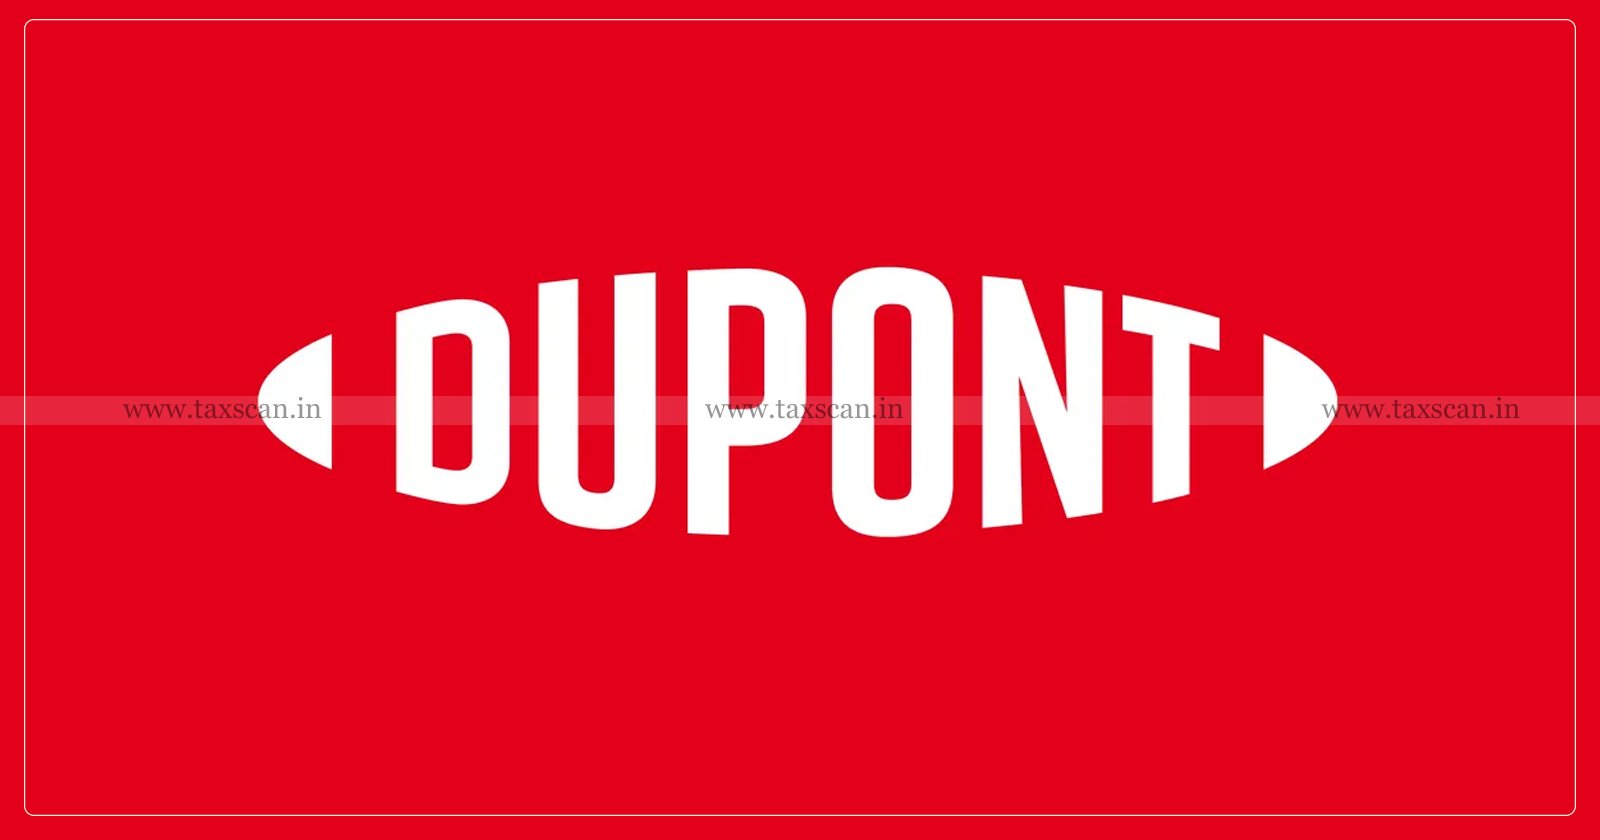 ACCA Trainee Vacancy in DuPont - ACCA - ACCA Trainee - Trainee - Vacancy in DuPont - DuPont - jobscan - taxscan